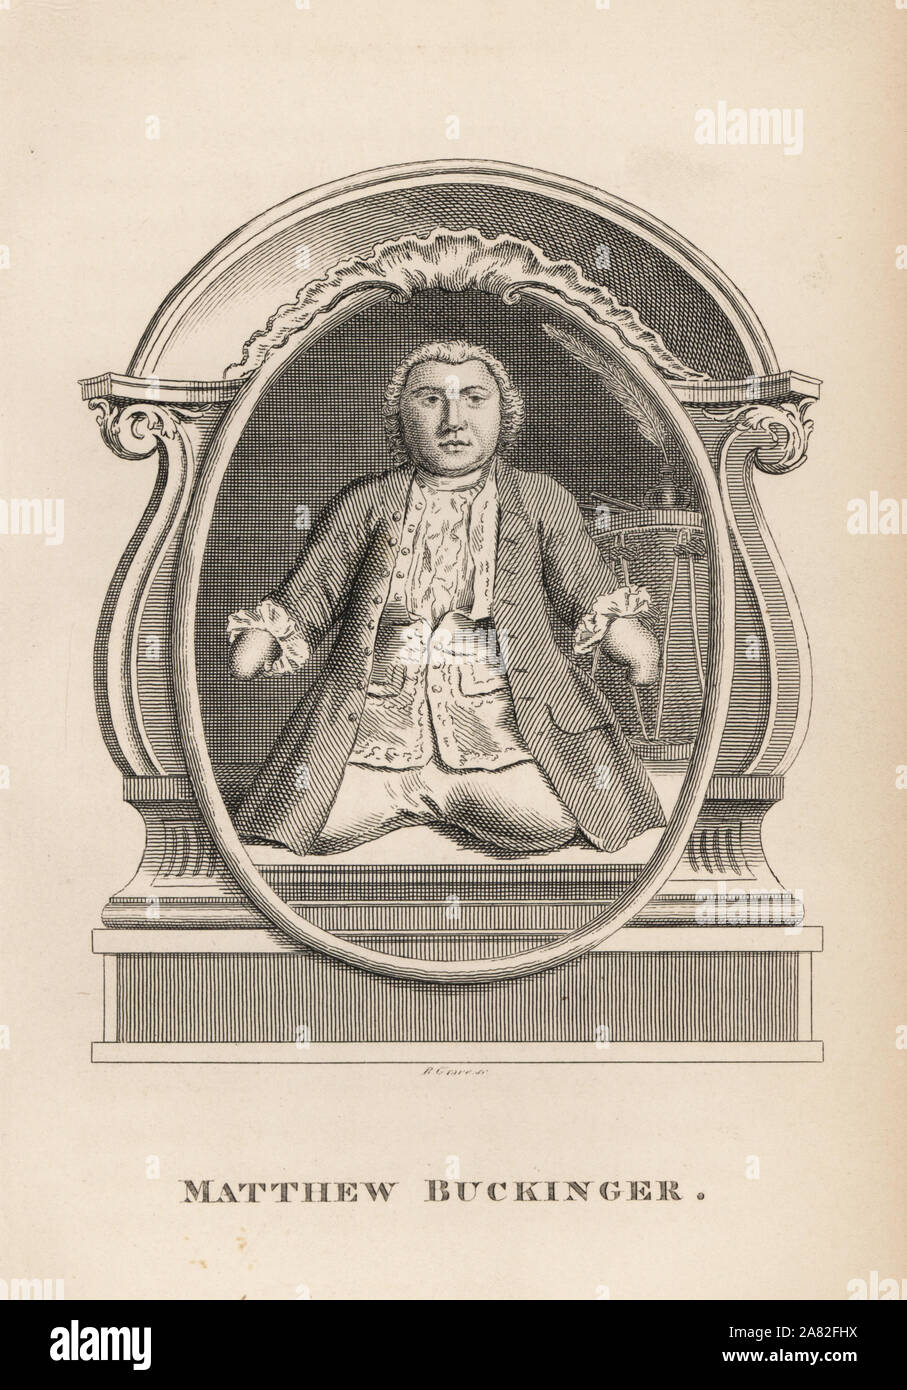 Matthew Buckinger, German performer who married four times and had 11 children, died 1722. Engraving by R. Grave from James Caulfield's Portraits, Memoirs and Characters of Remarkable Persons, London, 1819. Stock Photo